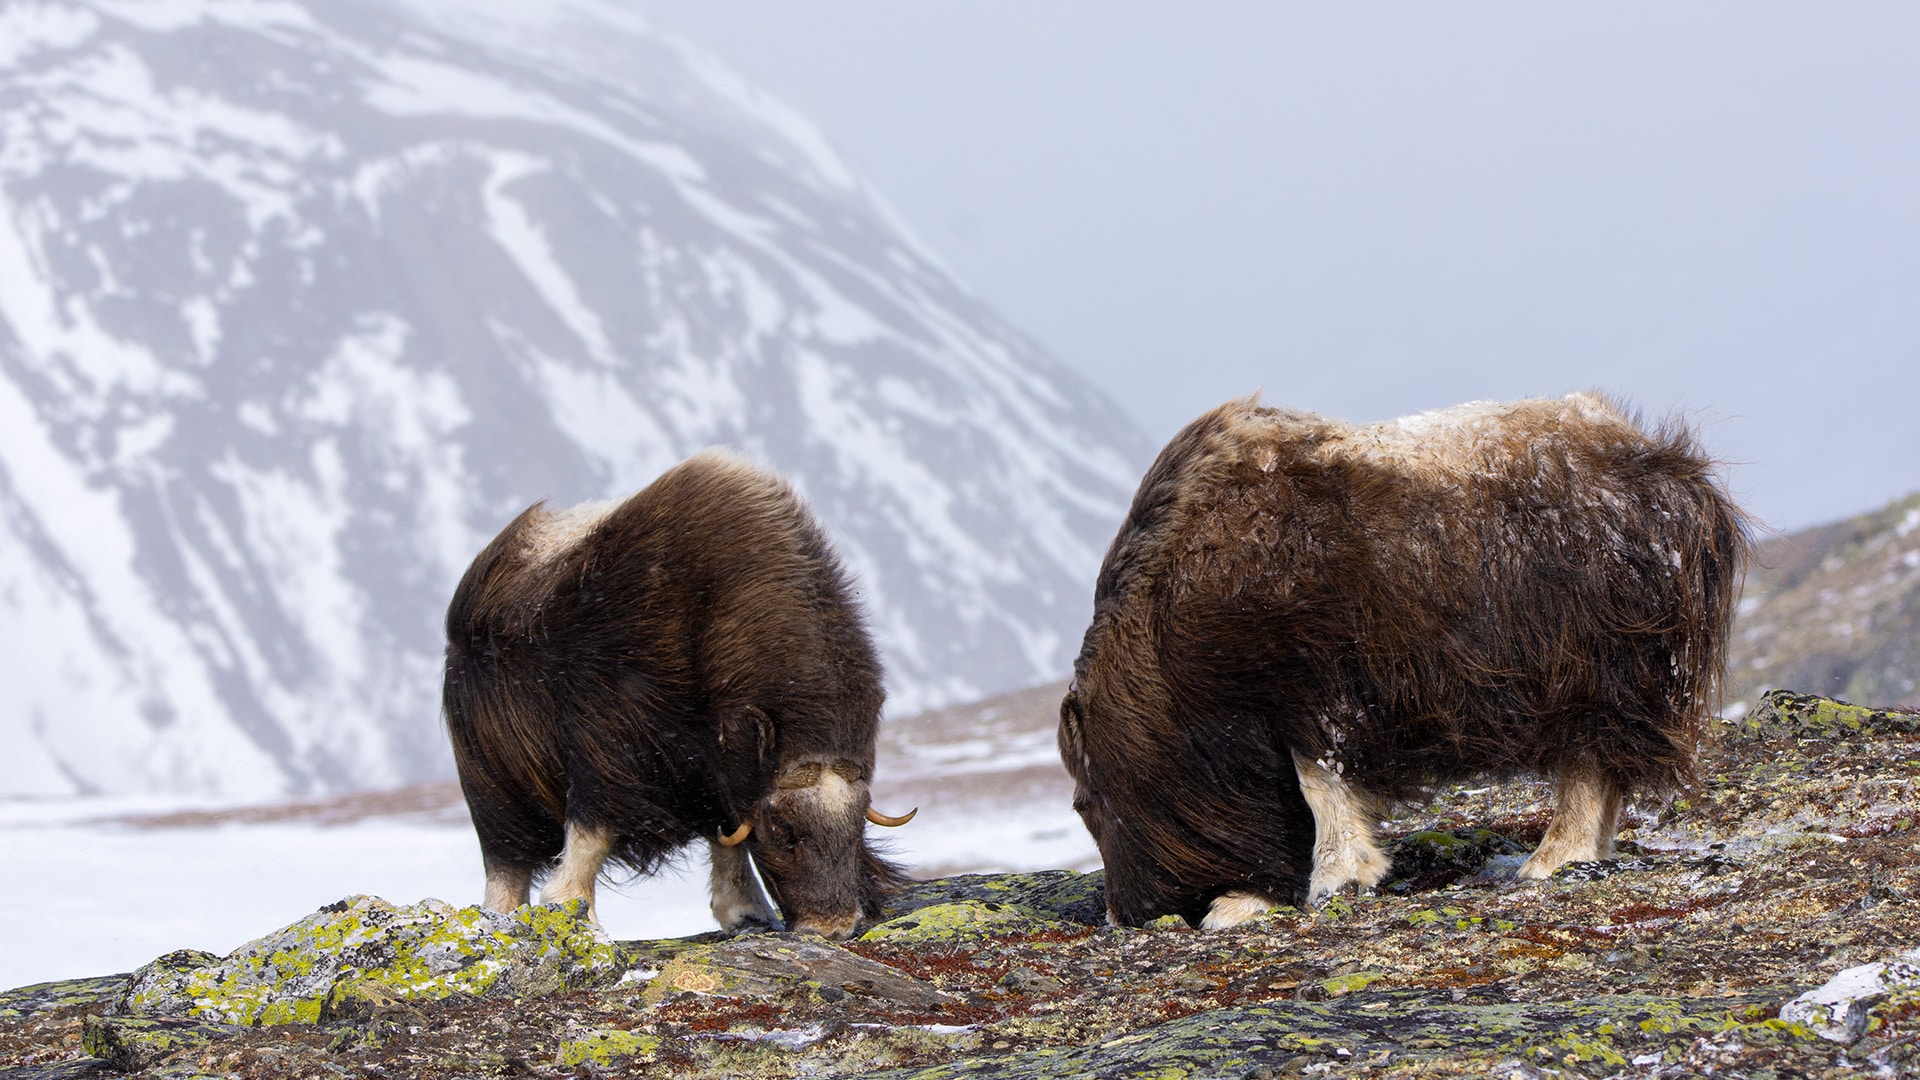 Two musks eating in front of snowy mountains at Dovrefjell.